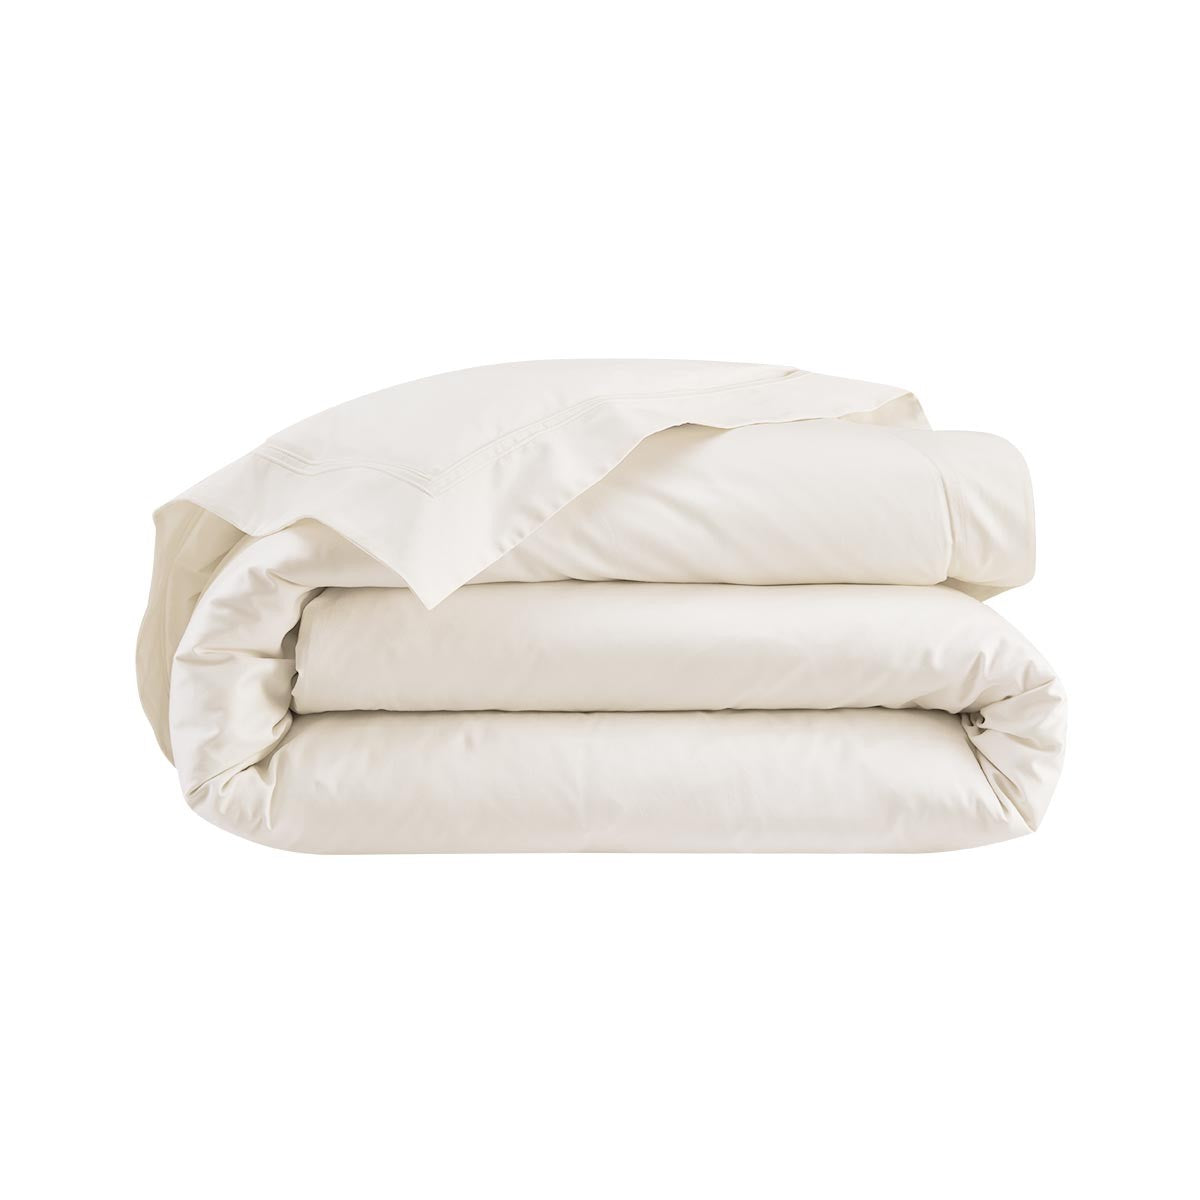 shop-the-official-shop-of-yves-delorme-triomphe-bedding-collection-online-now_22.jpg